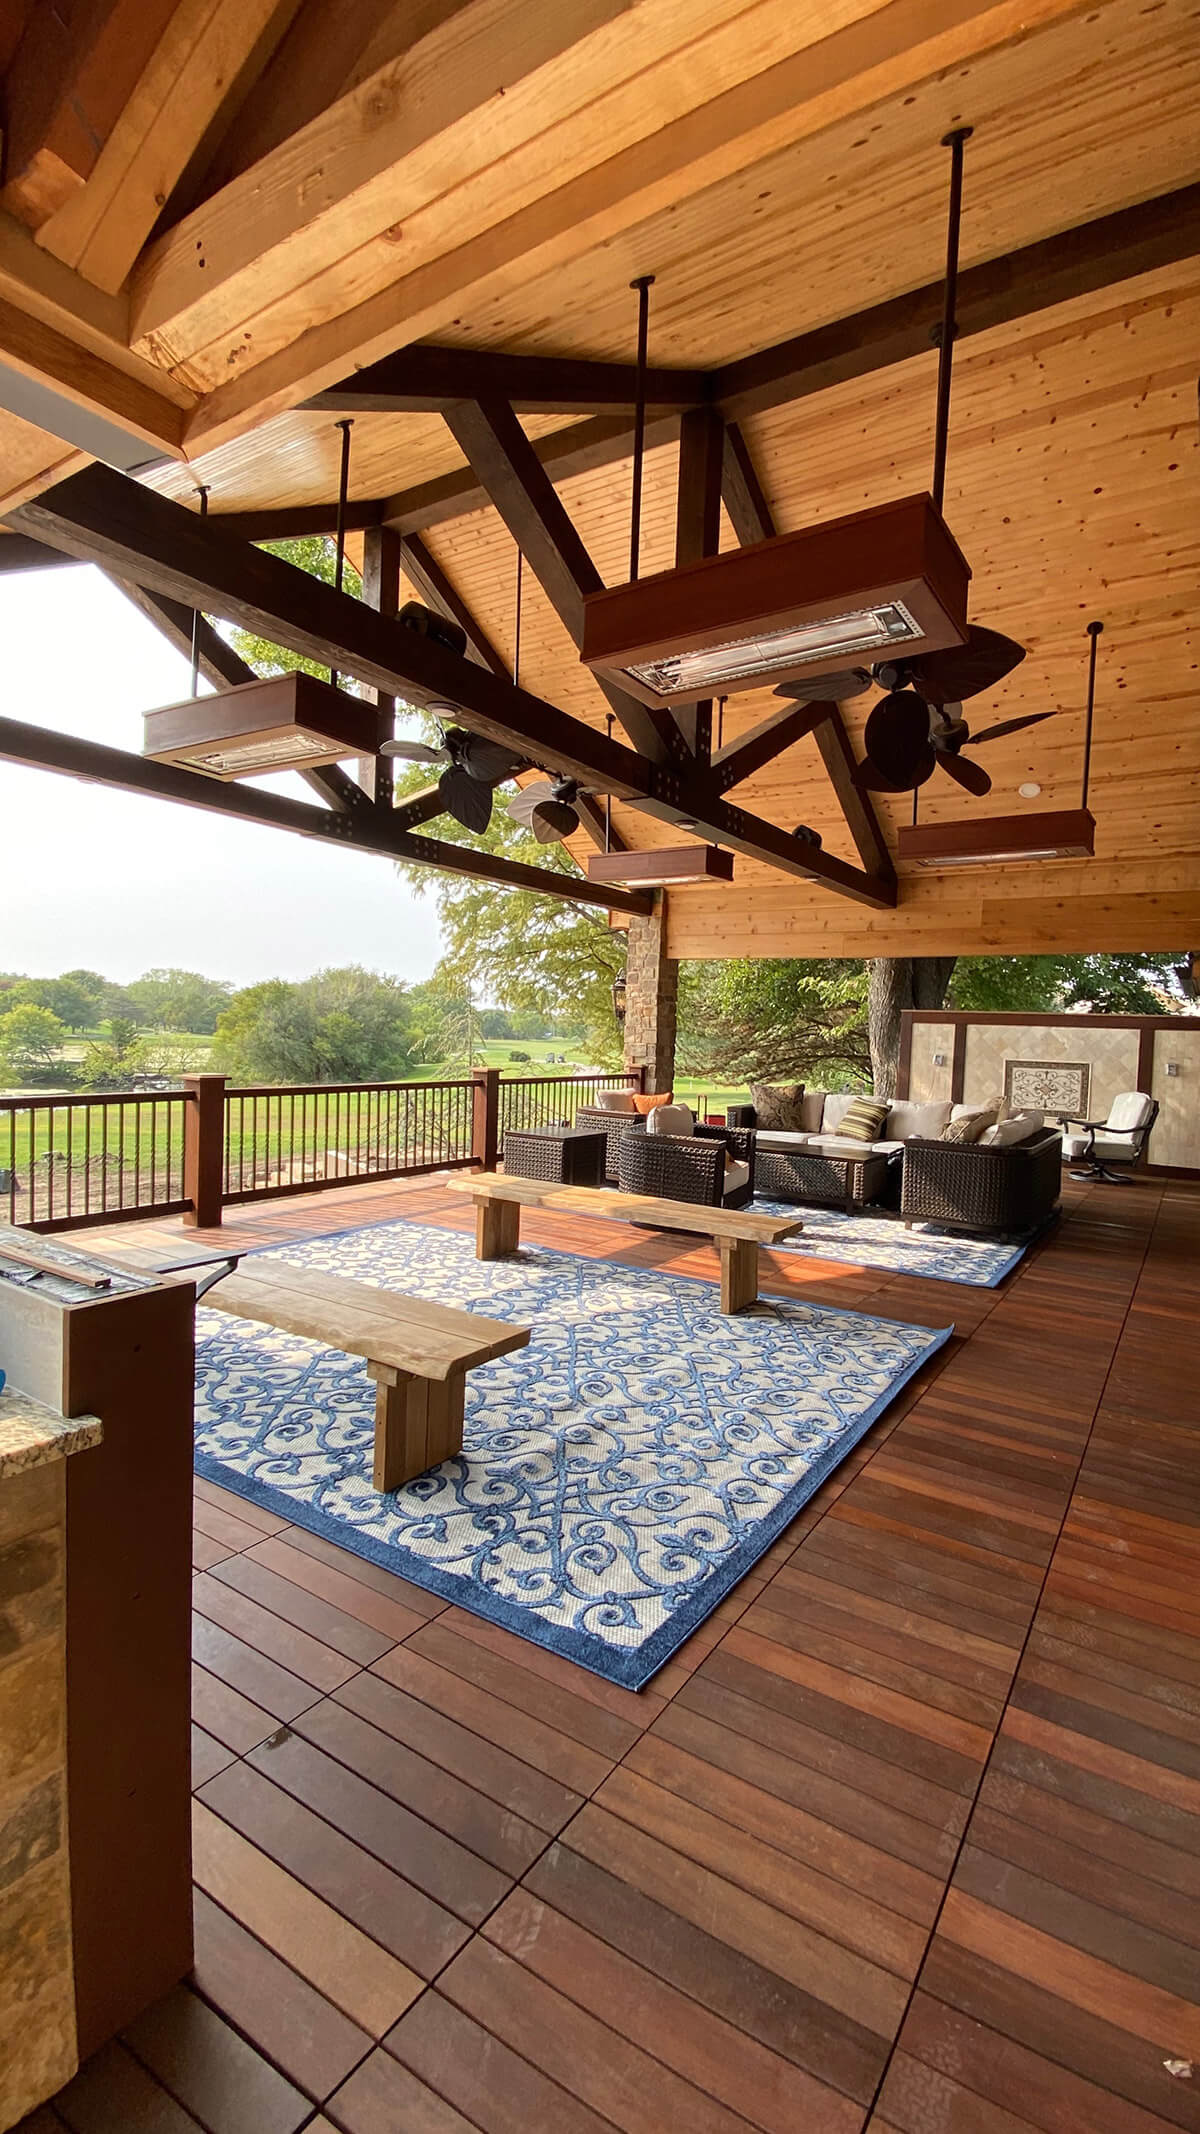 Wooden Deck with two seating areas, overhead fans and heating lamps.